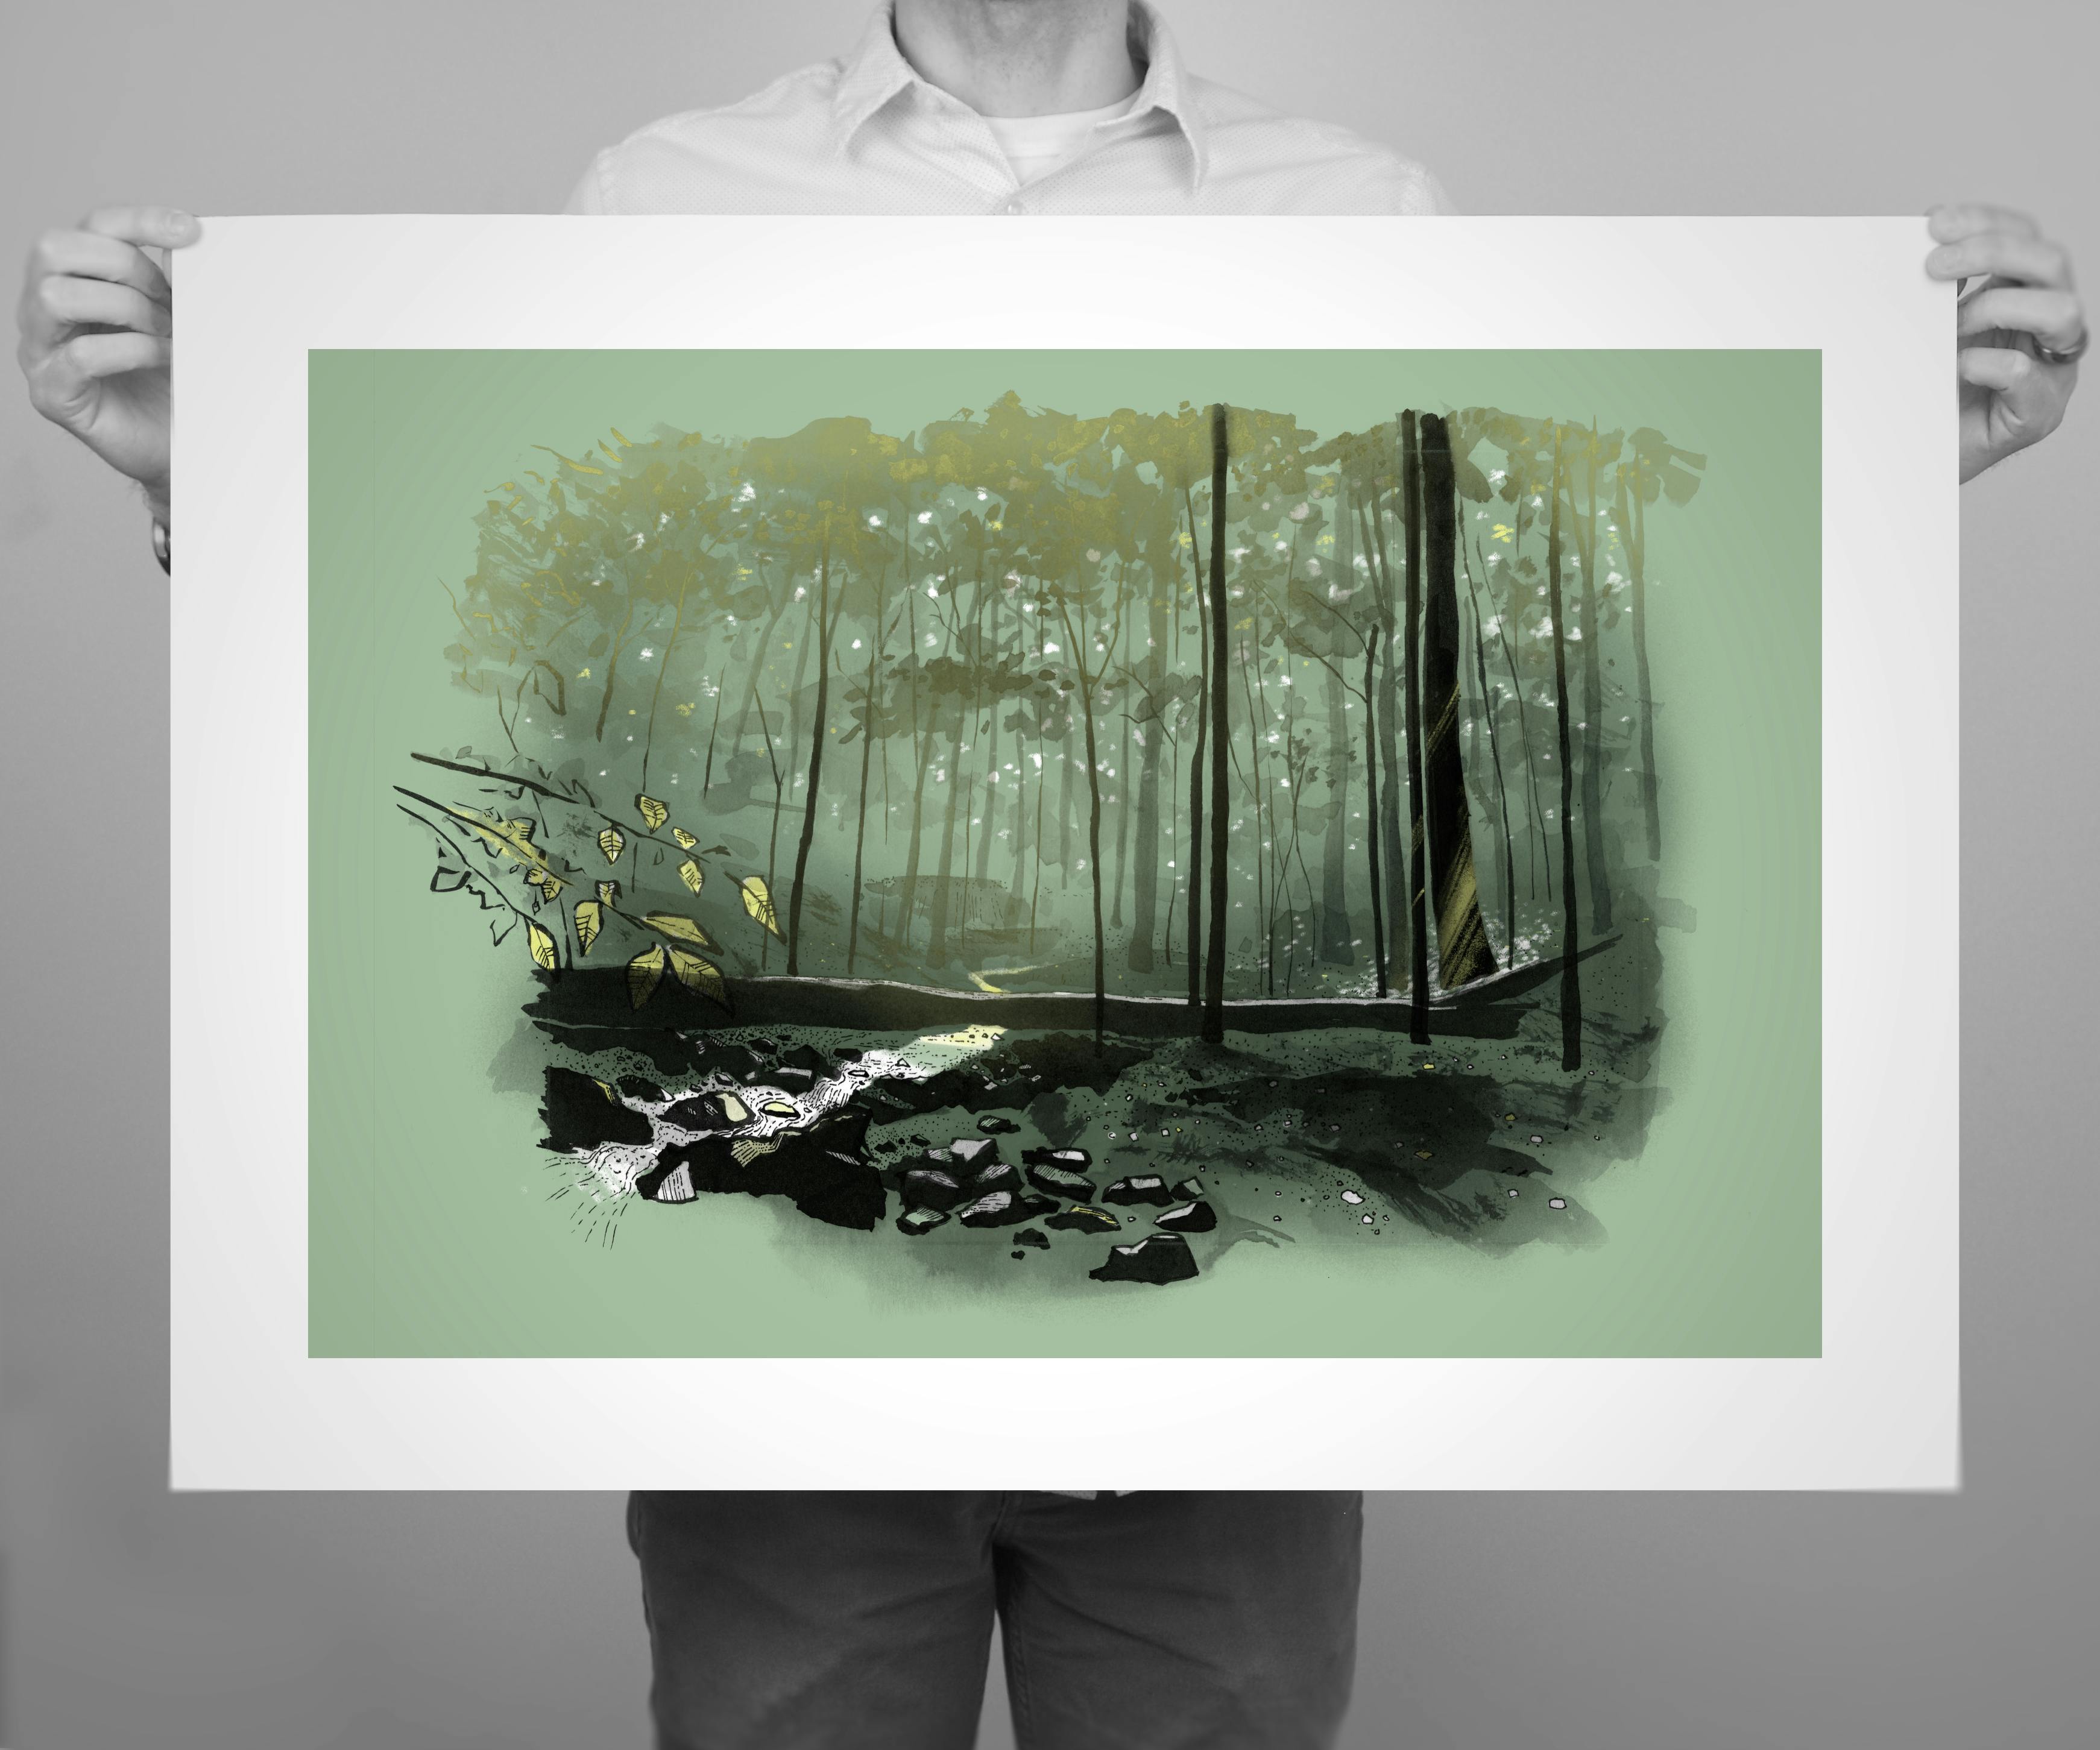 24 x 16” Giclee print edition of “Creekbed’ from the Patapsco illustration series